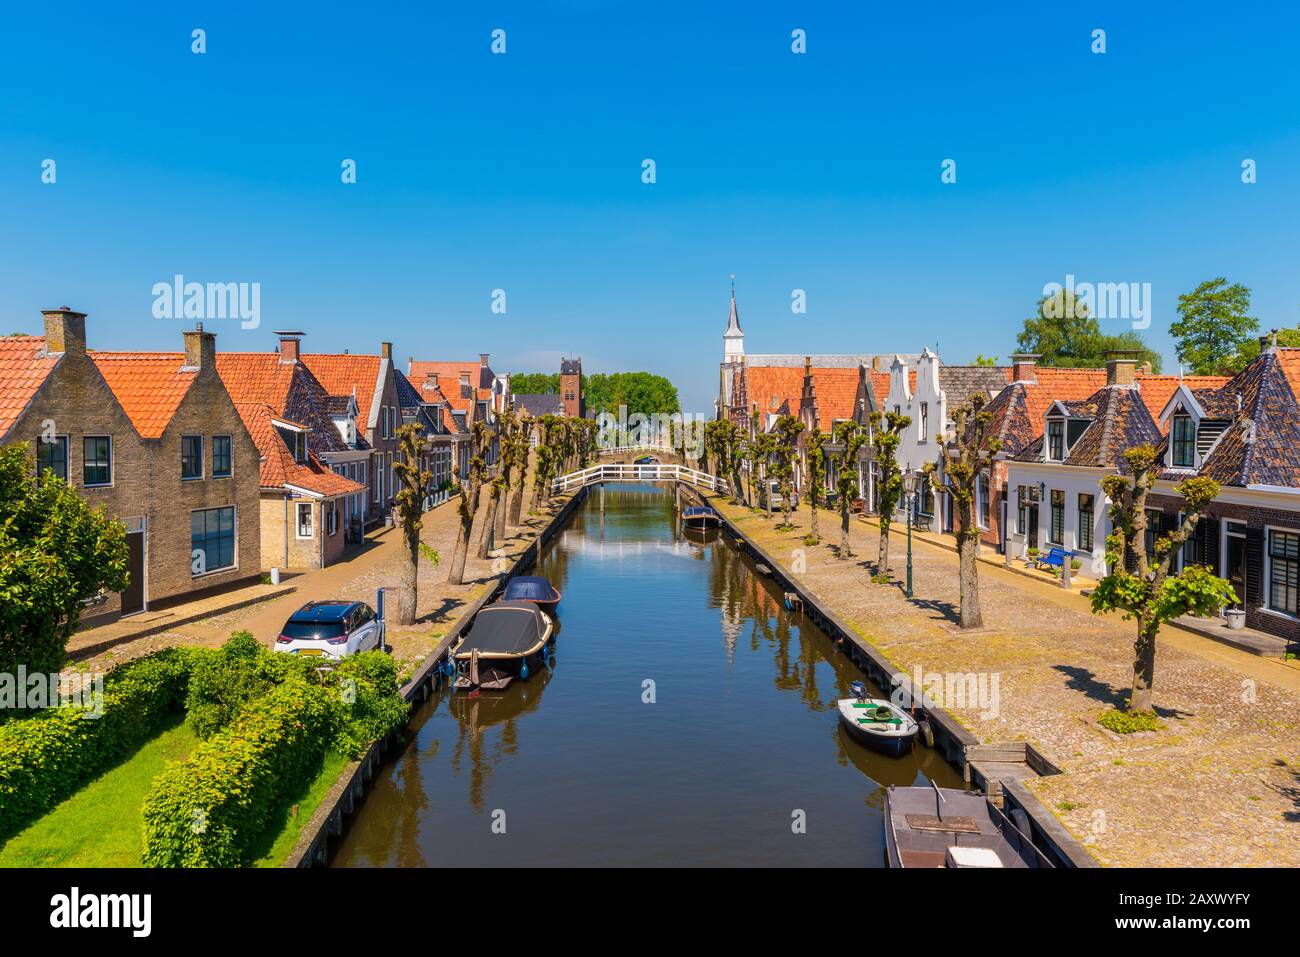 High angle view on Canal in Sloten Friesland Netherlands Stock Photo